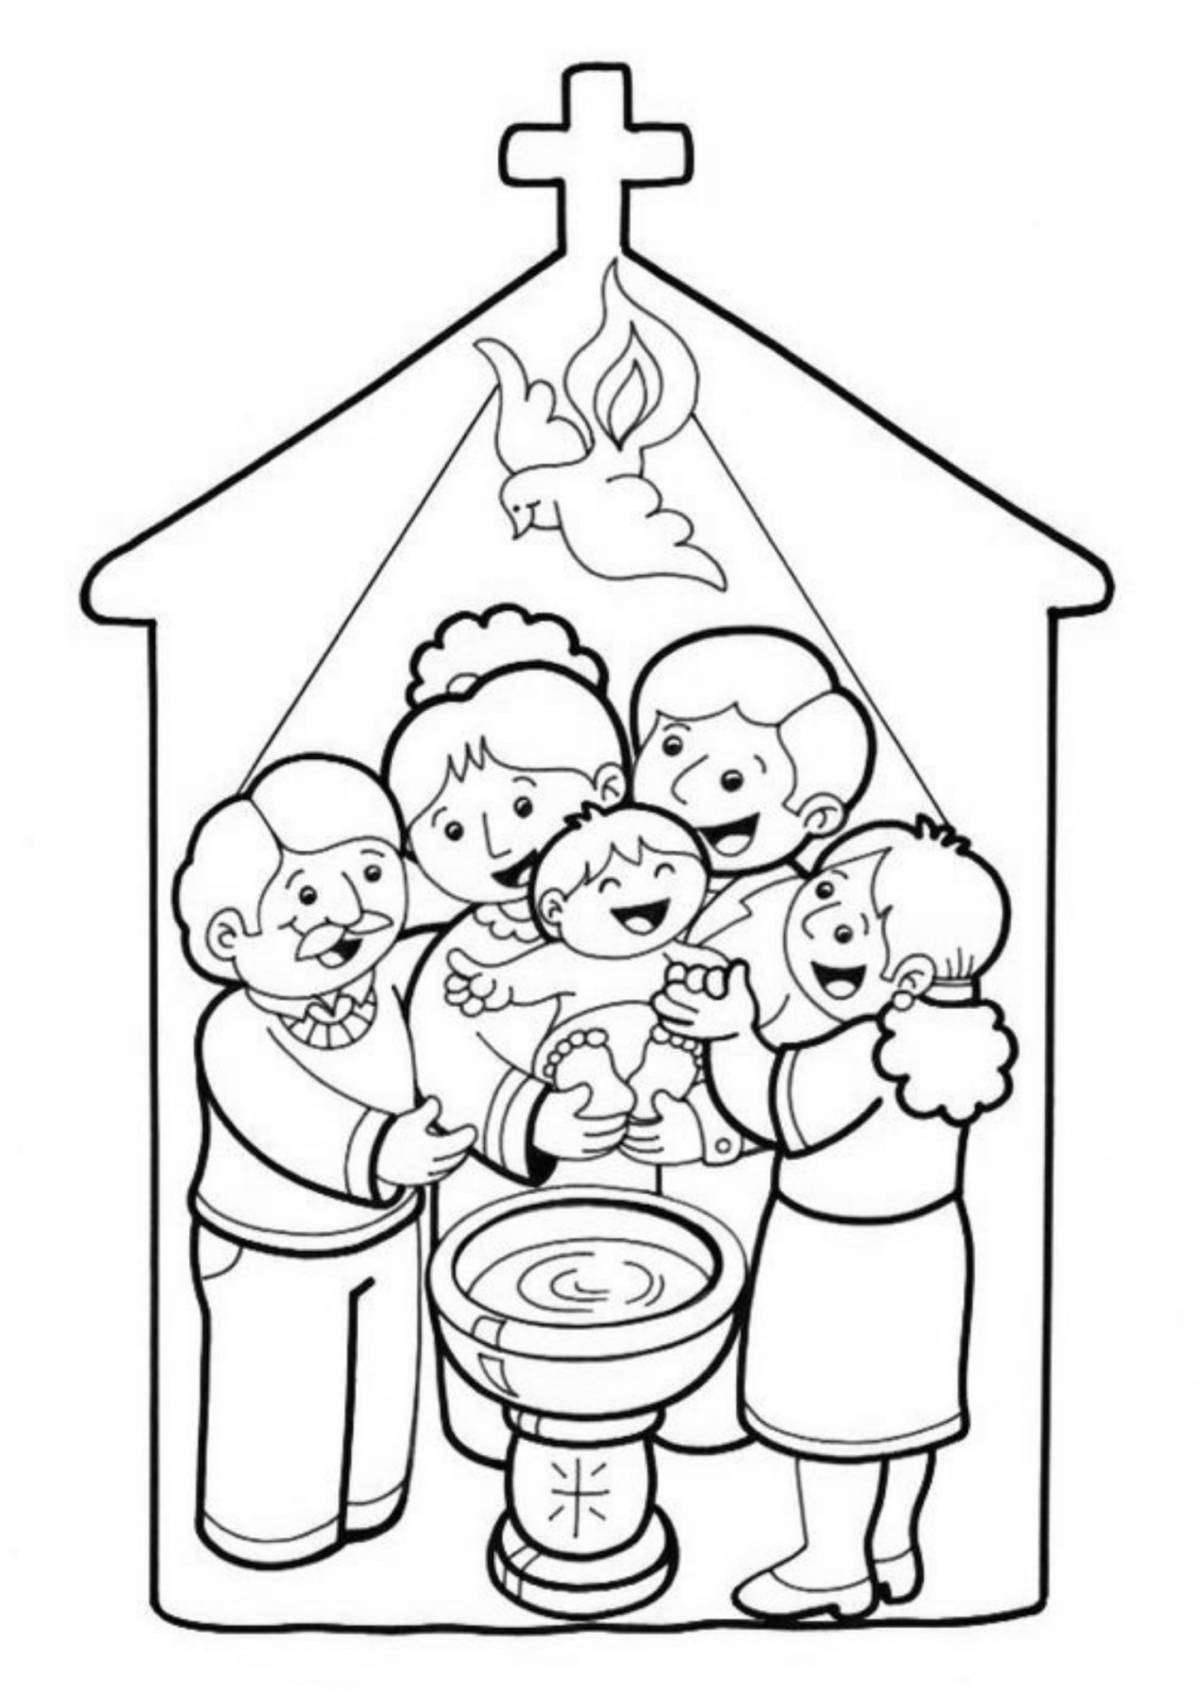 Exotic orthodox coloring book